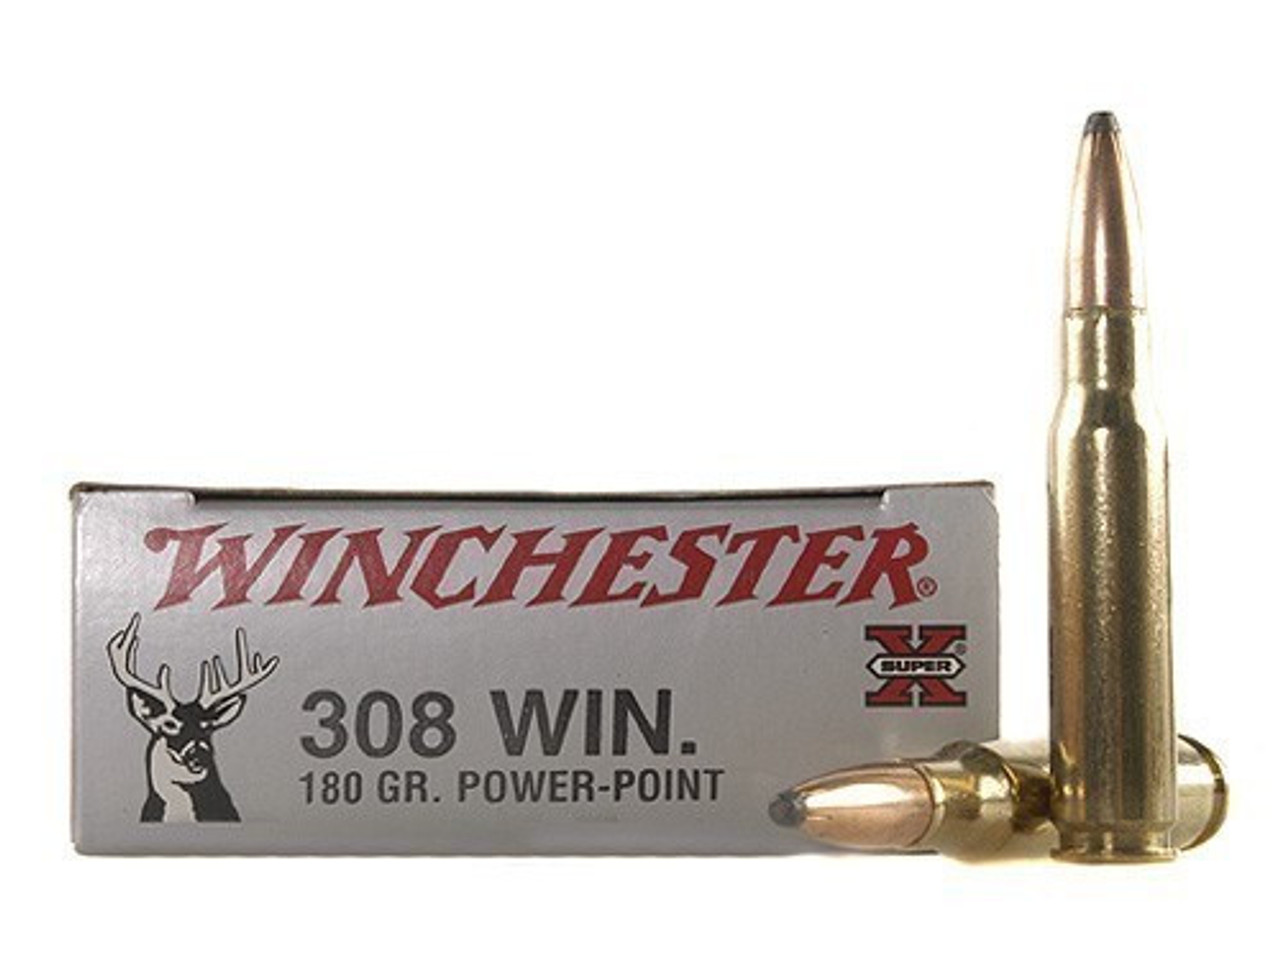 Winchester Super-X Rifle Ammo 308 , Power-Point, 180 Grains, 2620 fps, 20 Rnds